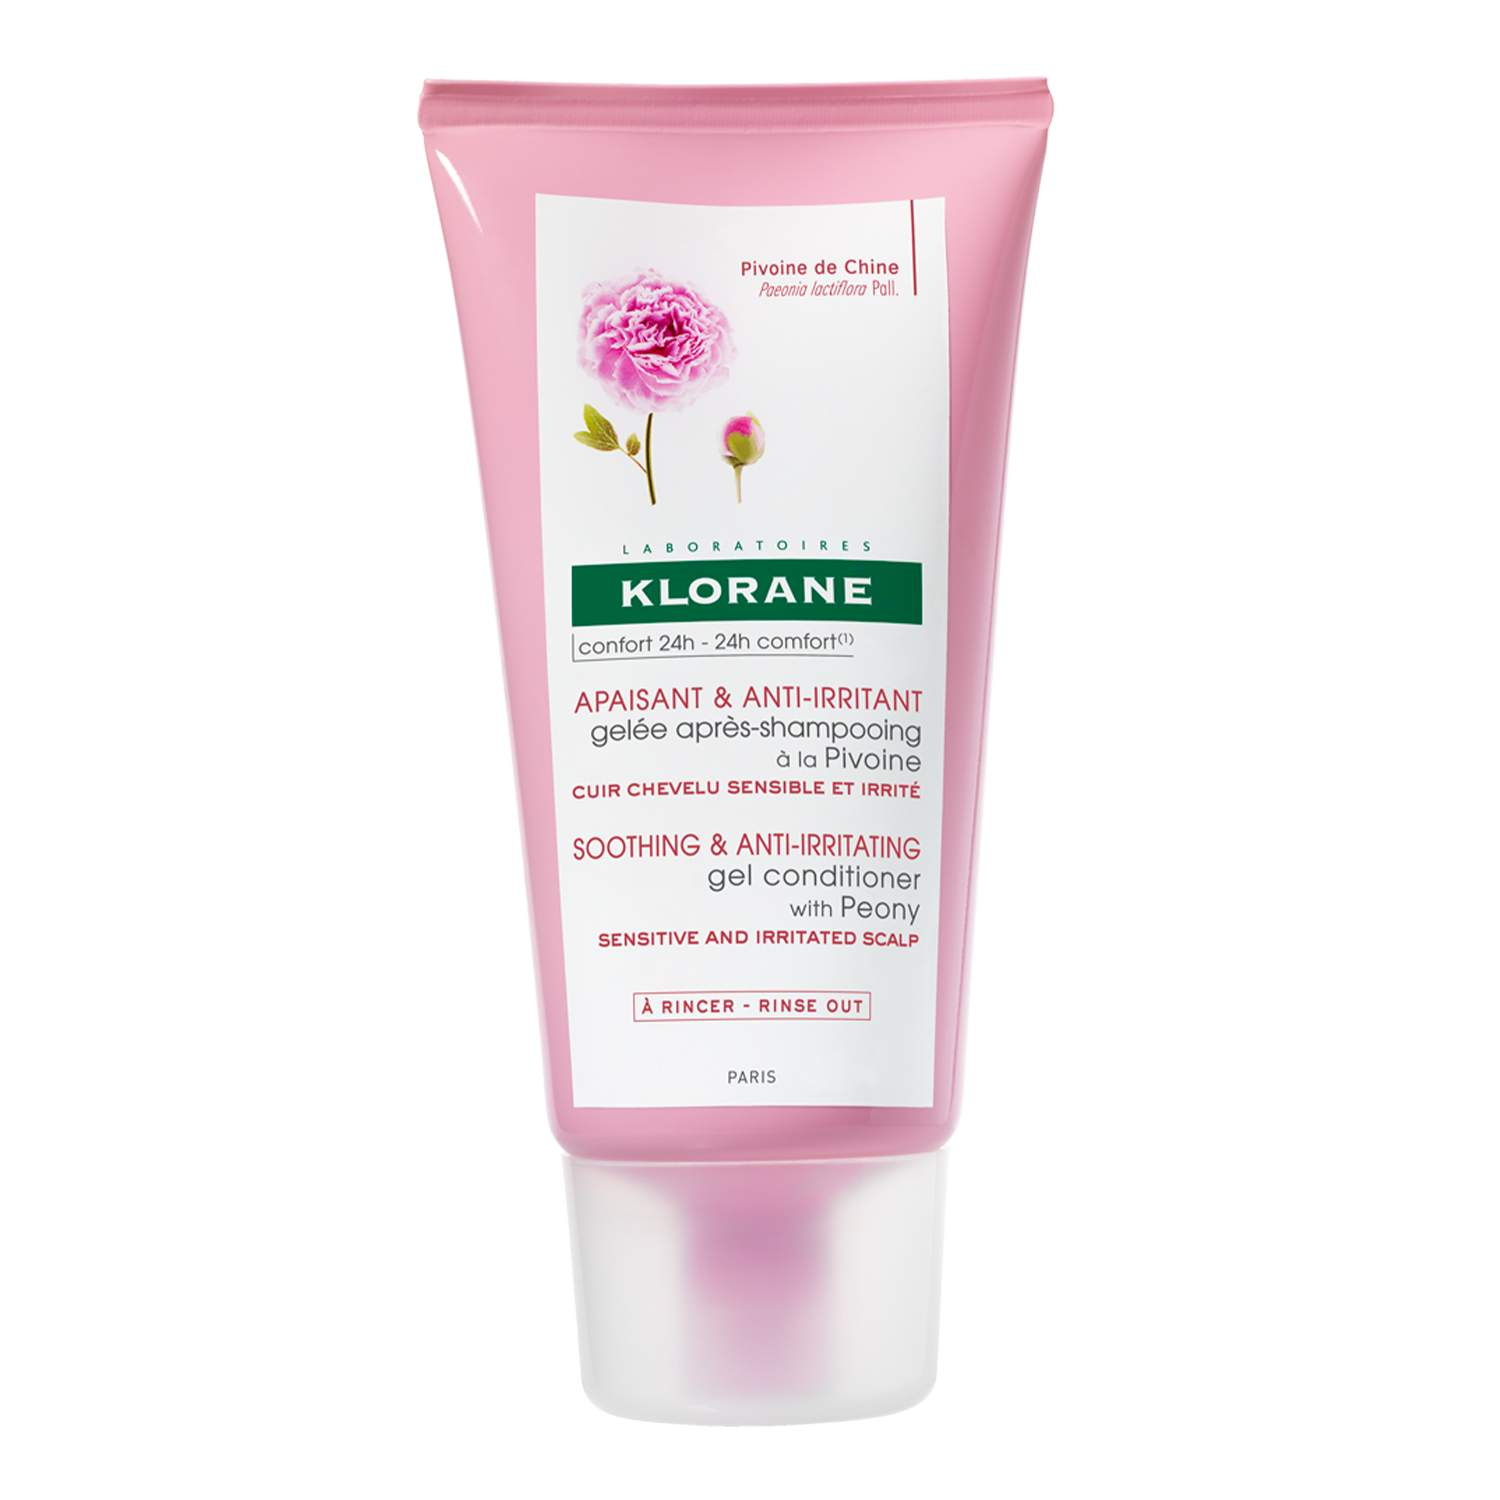 Klorane Soothing Conditioner with Peony for Sensitive Scalps Klorane Soothing Conditioner with Peony for Sensitive Scalps 1